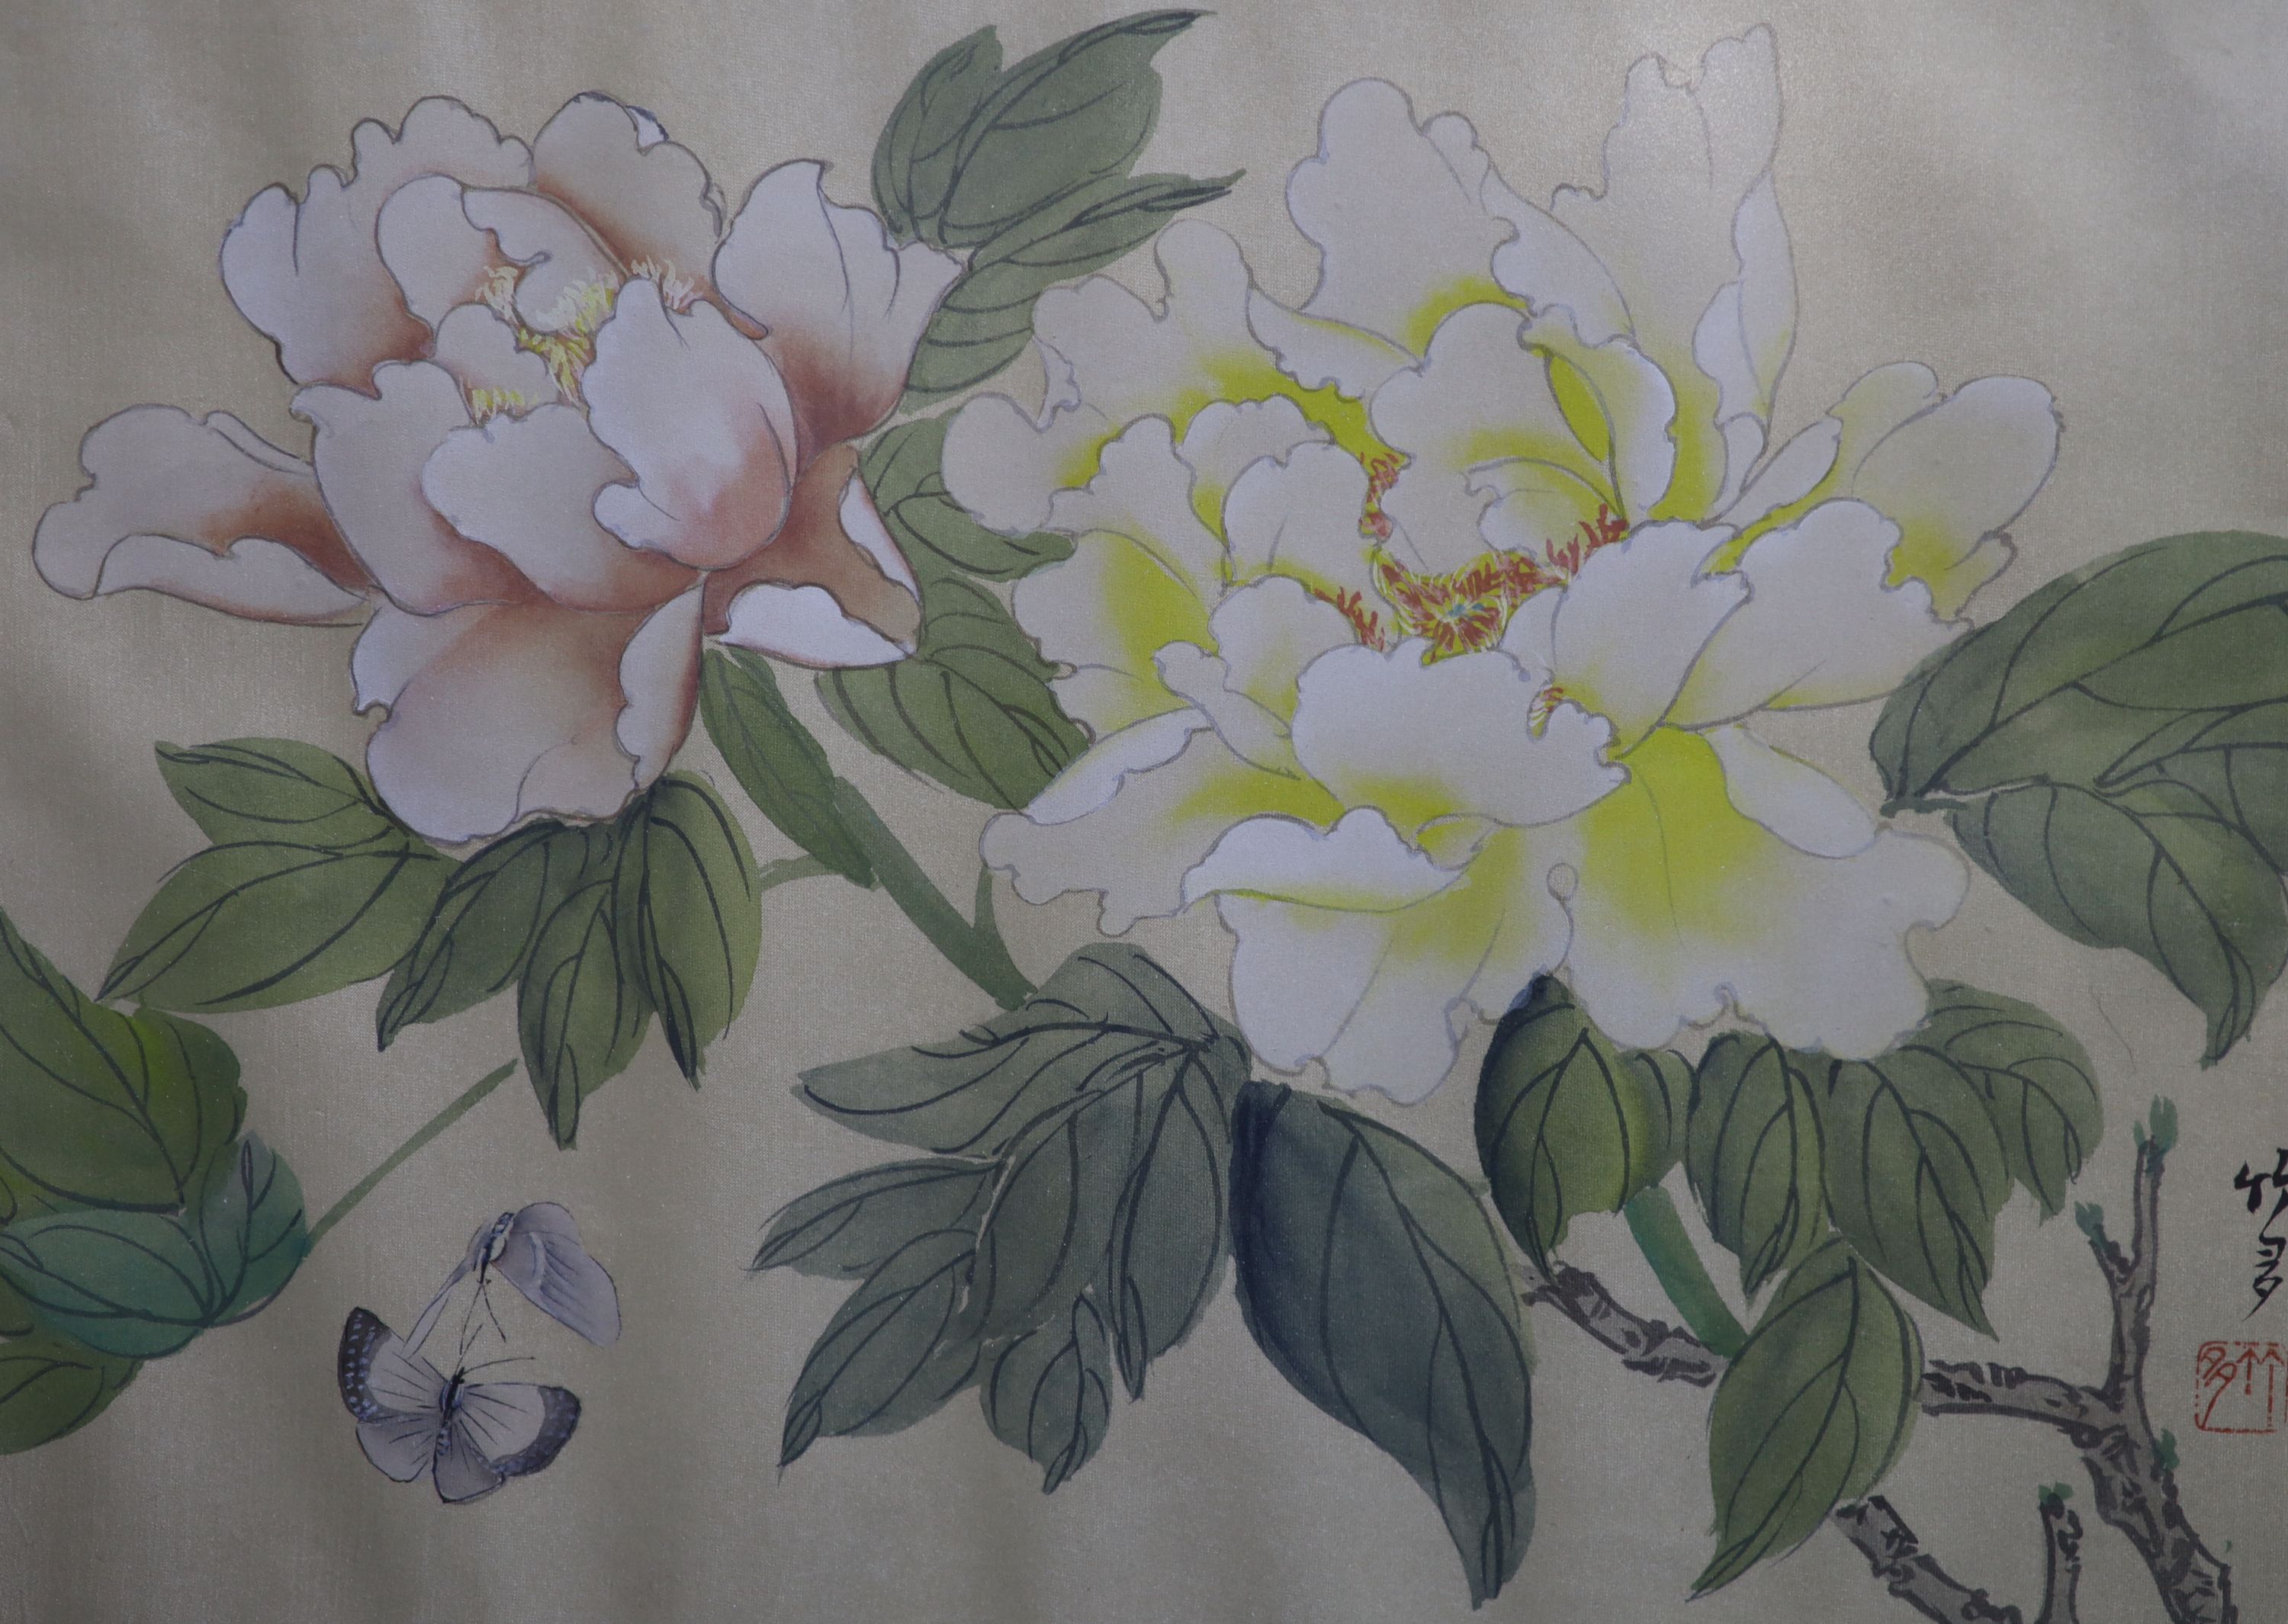 Chinese School, three watercolours on silk, Studies of flowers and butterflies, 28 x 38cm